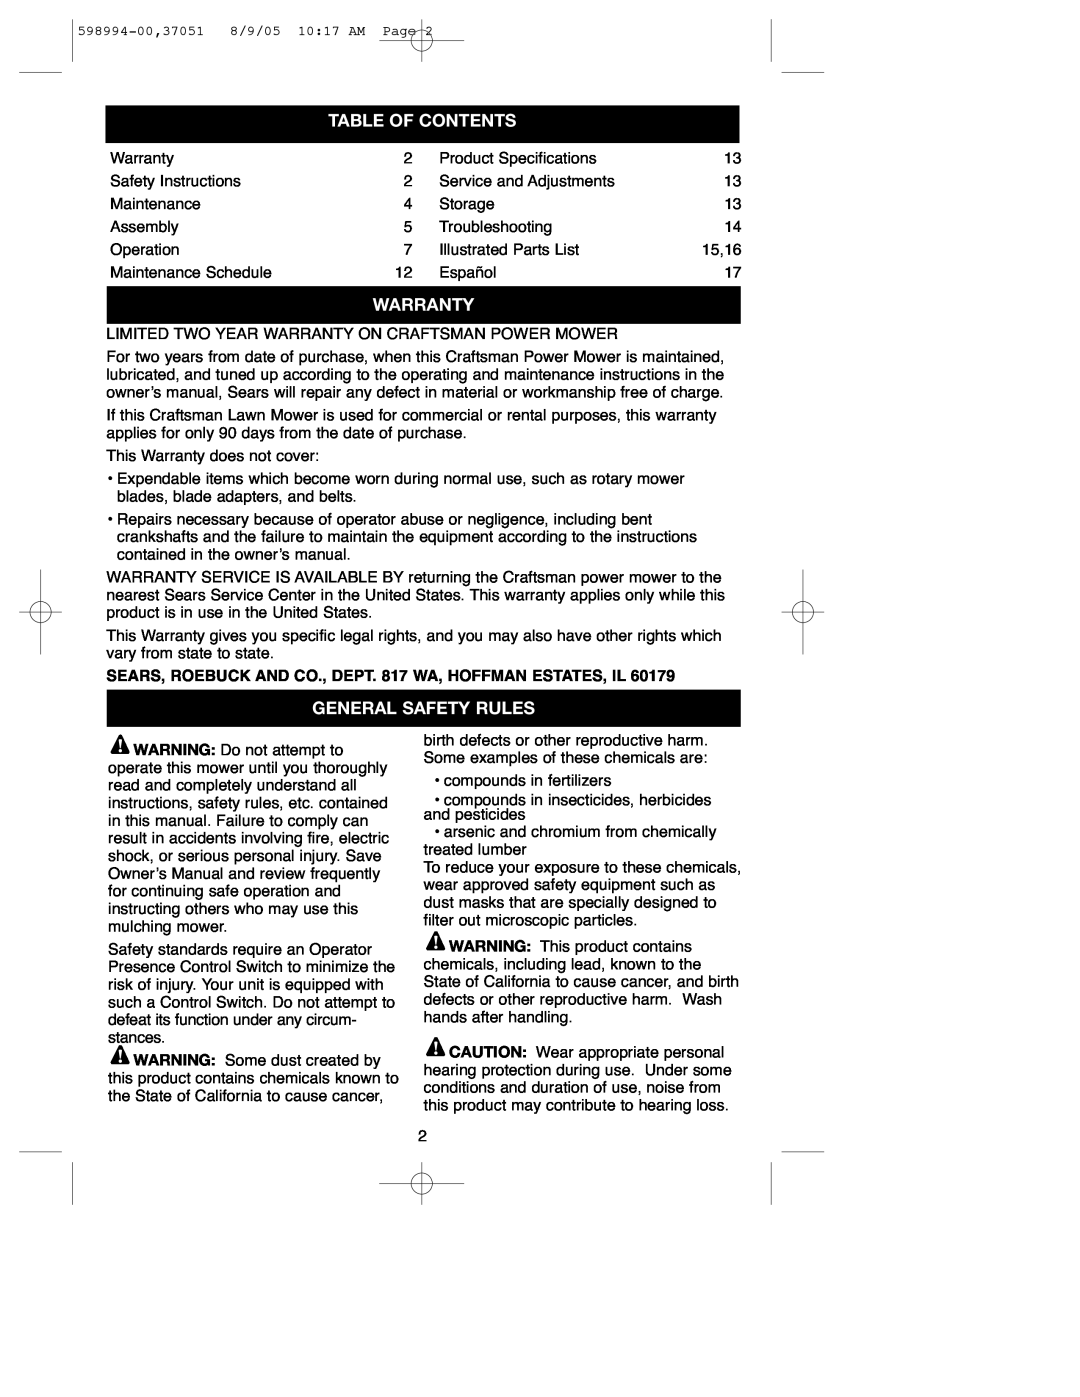 DeWalt 900.37051 instruction manual Table Of Contents, Warranty, General Safety Rules 